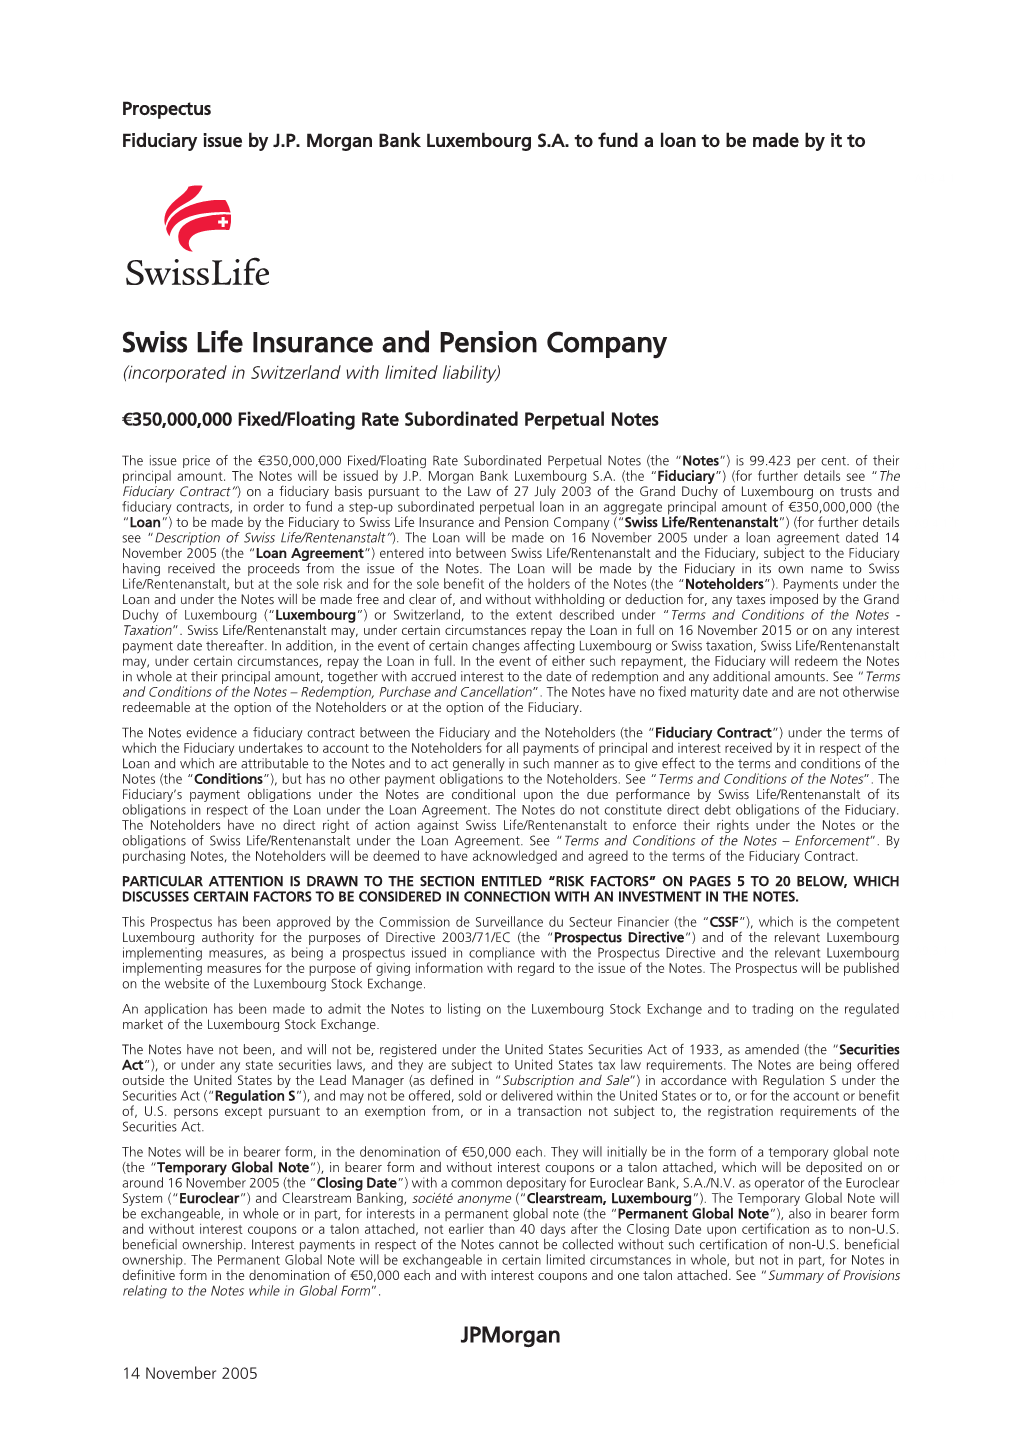 Swiss Life Insurance and Pension Company (Incorporated in Switzerland with Limited Liability)